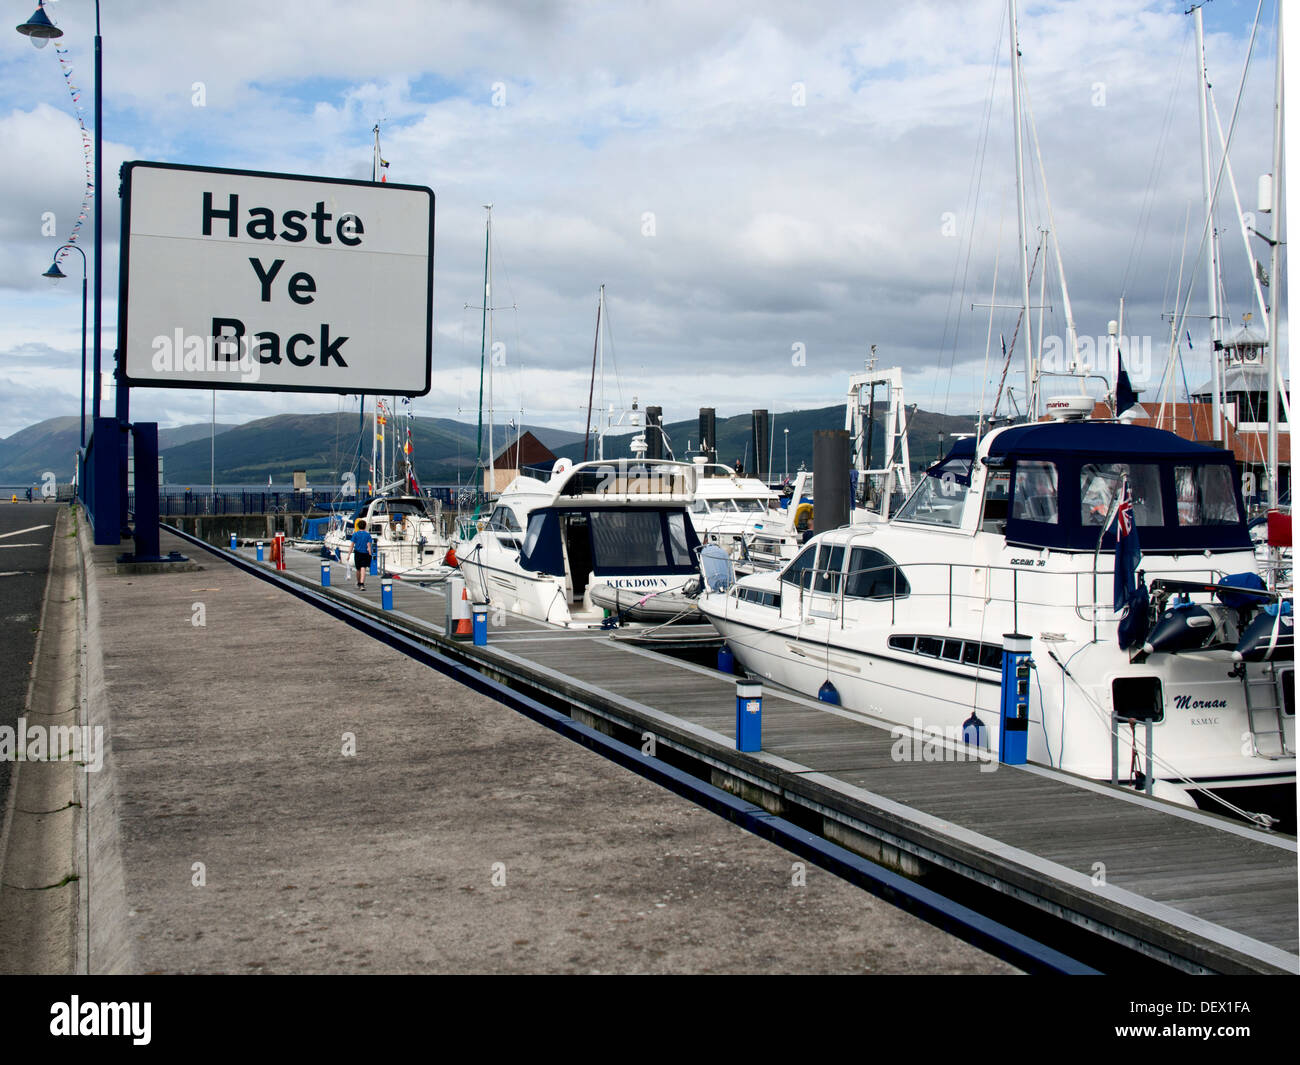 Haste Ye Back sign at Rothesay Harbour, Isle of Bute Stock Photo